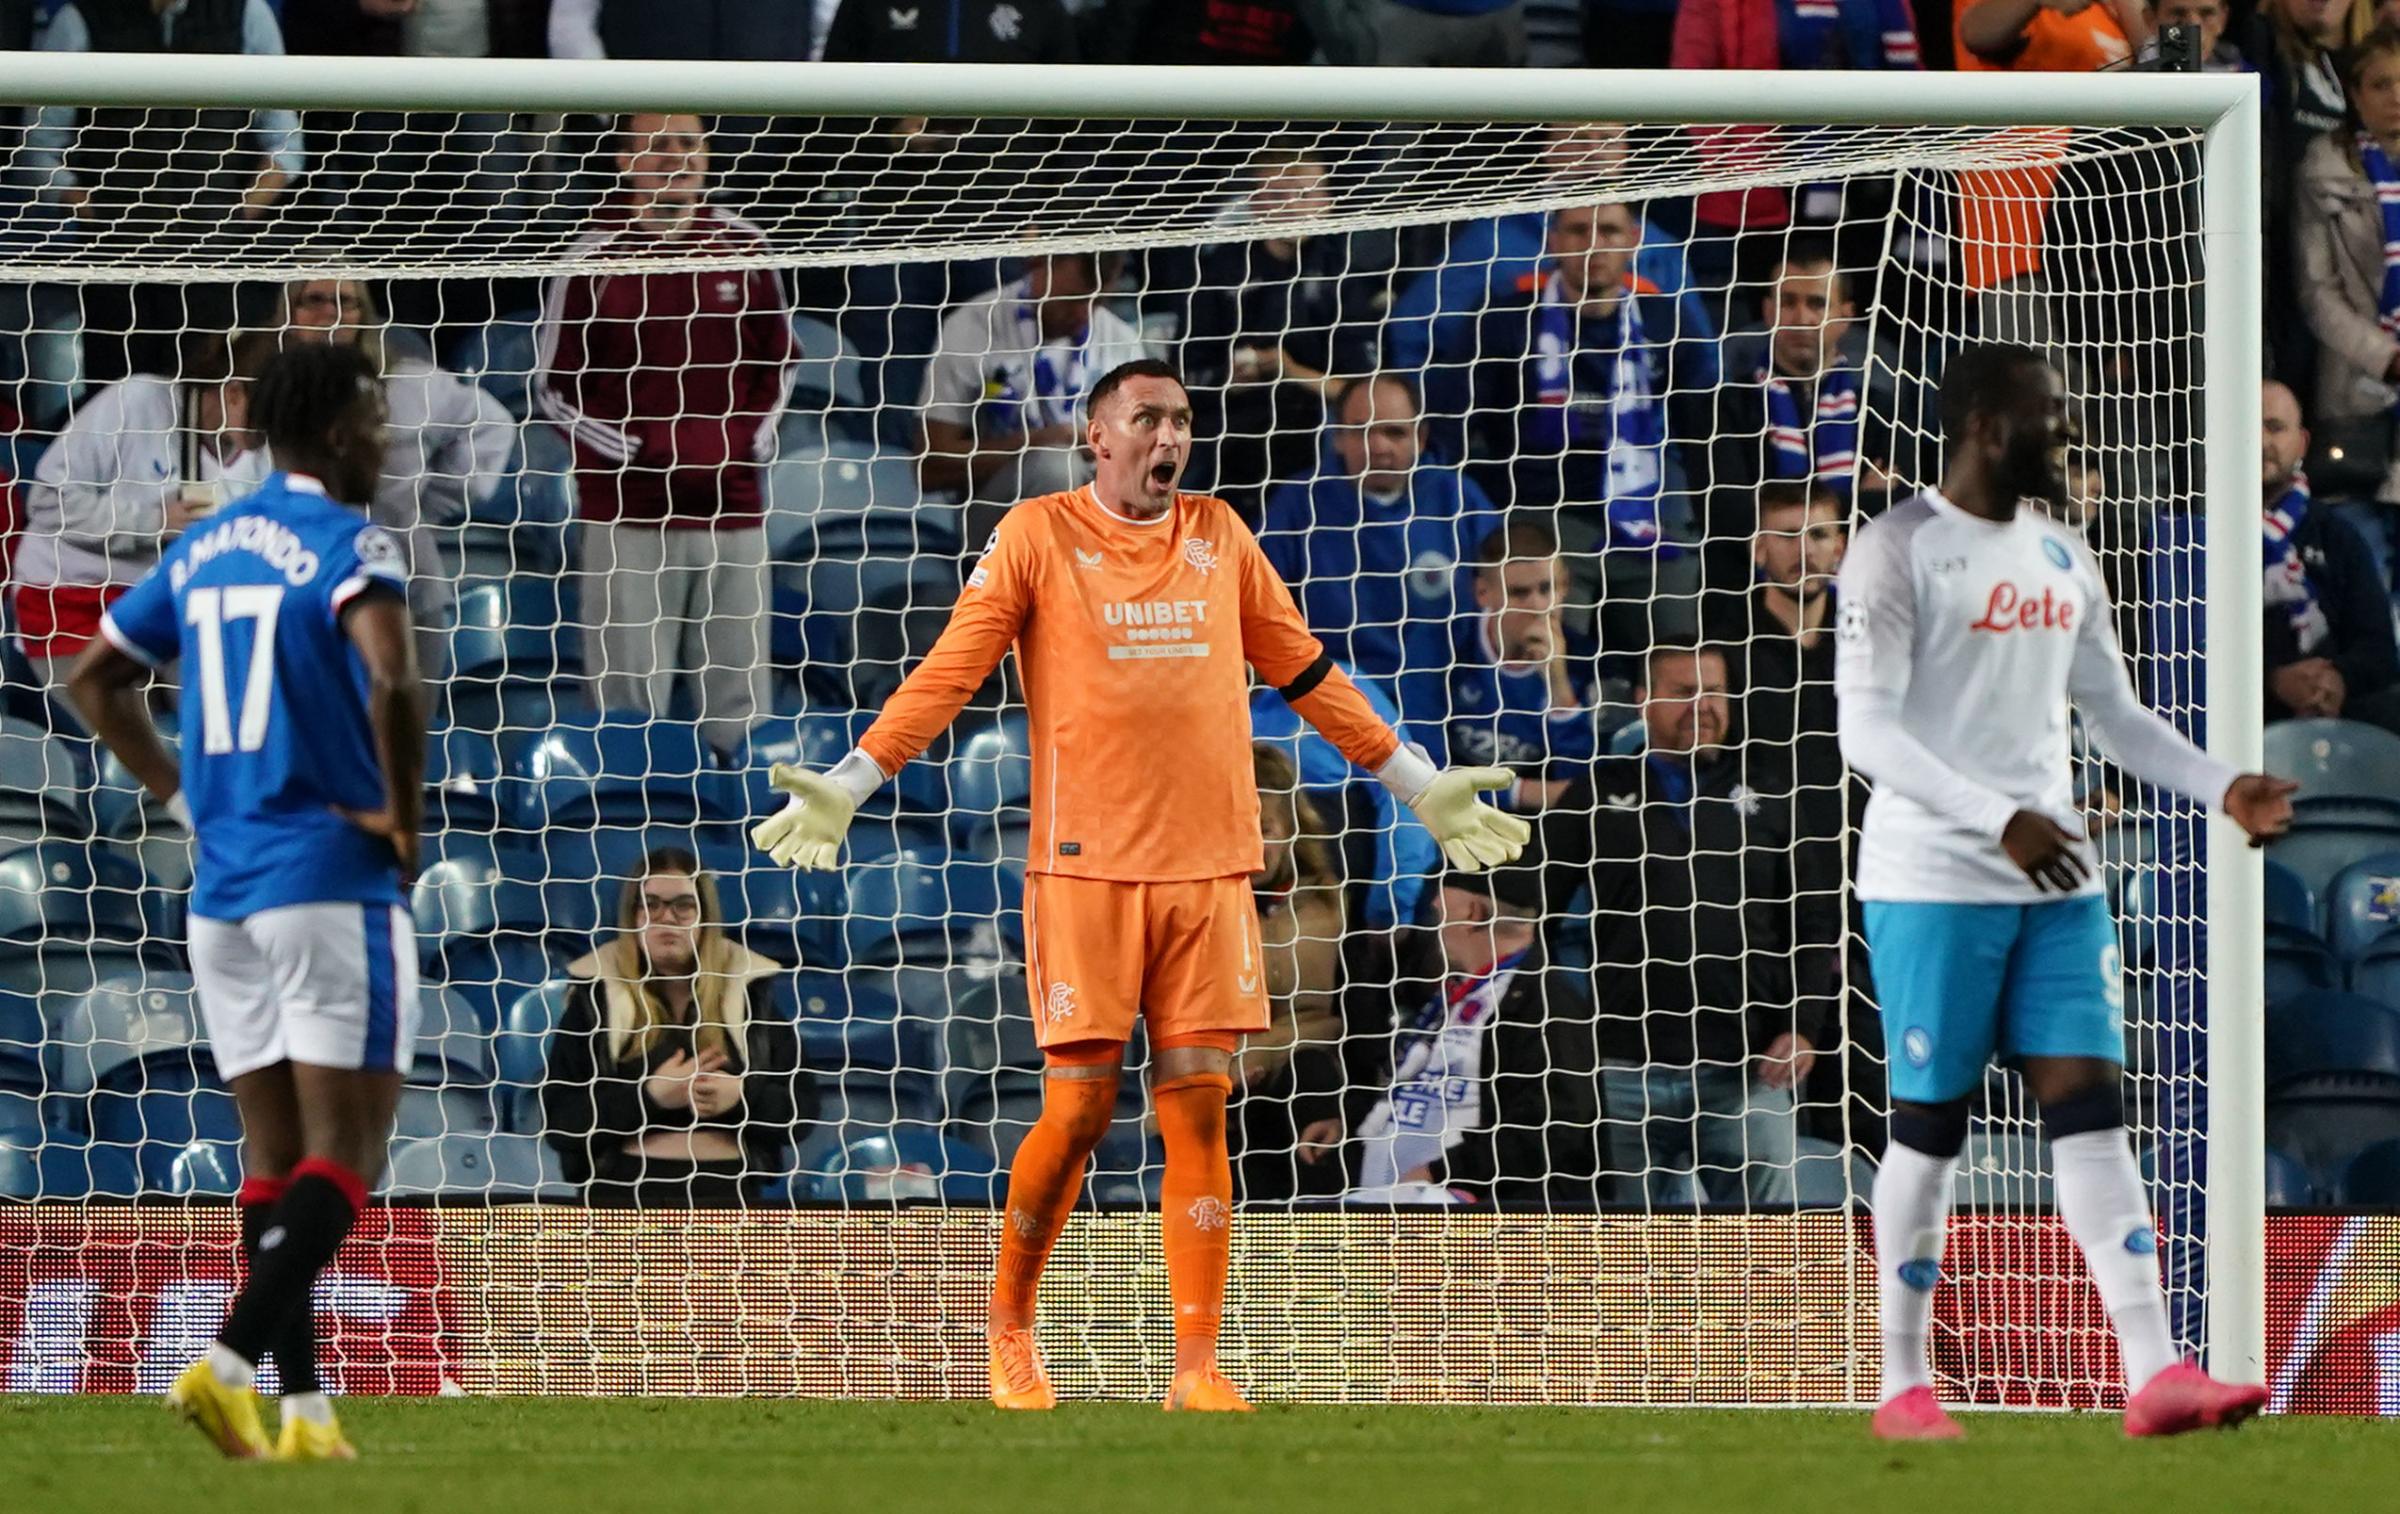 Rangers goalkeeper Allan McGregor during the UEFA Champions League Group A match at Ibrox Stadium, Glasgow. Picture date: Wednesday September 14, 2022. PA Photo. See PA story SOCCER Rangers. Photo credit should read: Andrew Milligan/PA